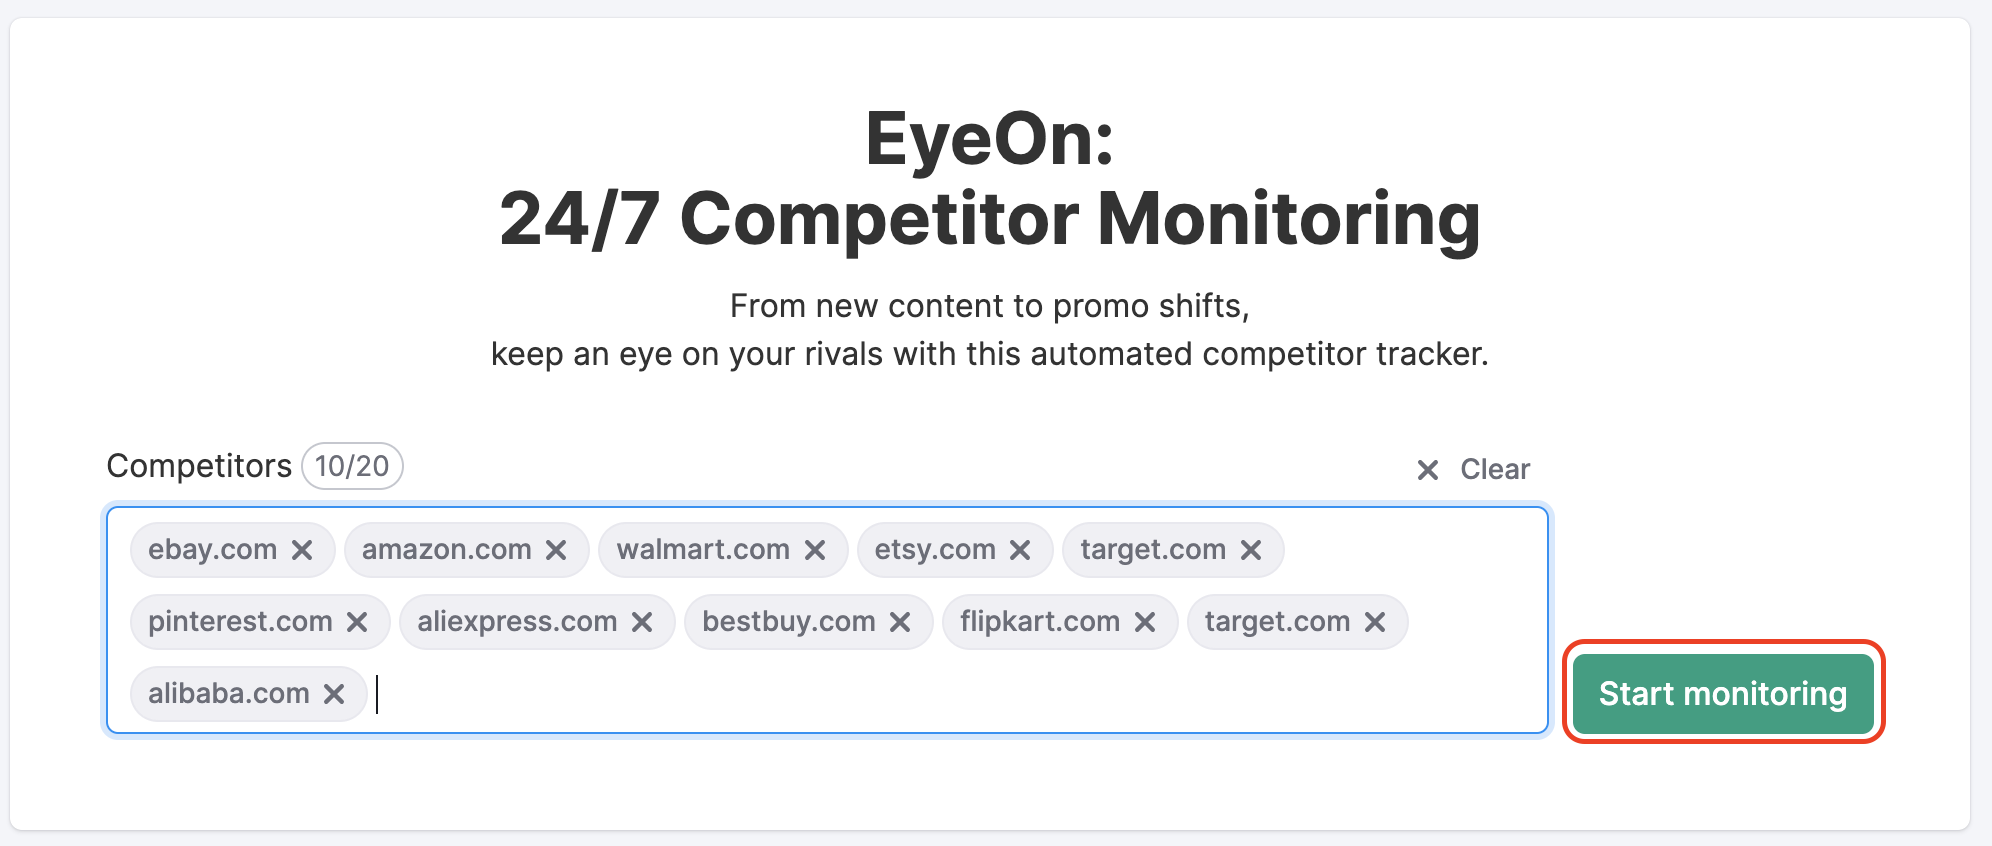 EyeOn landing page with the websites to analyze and a highlighted "Start monitoring" button